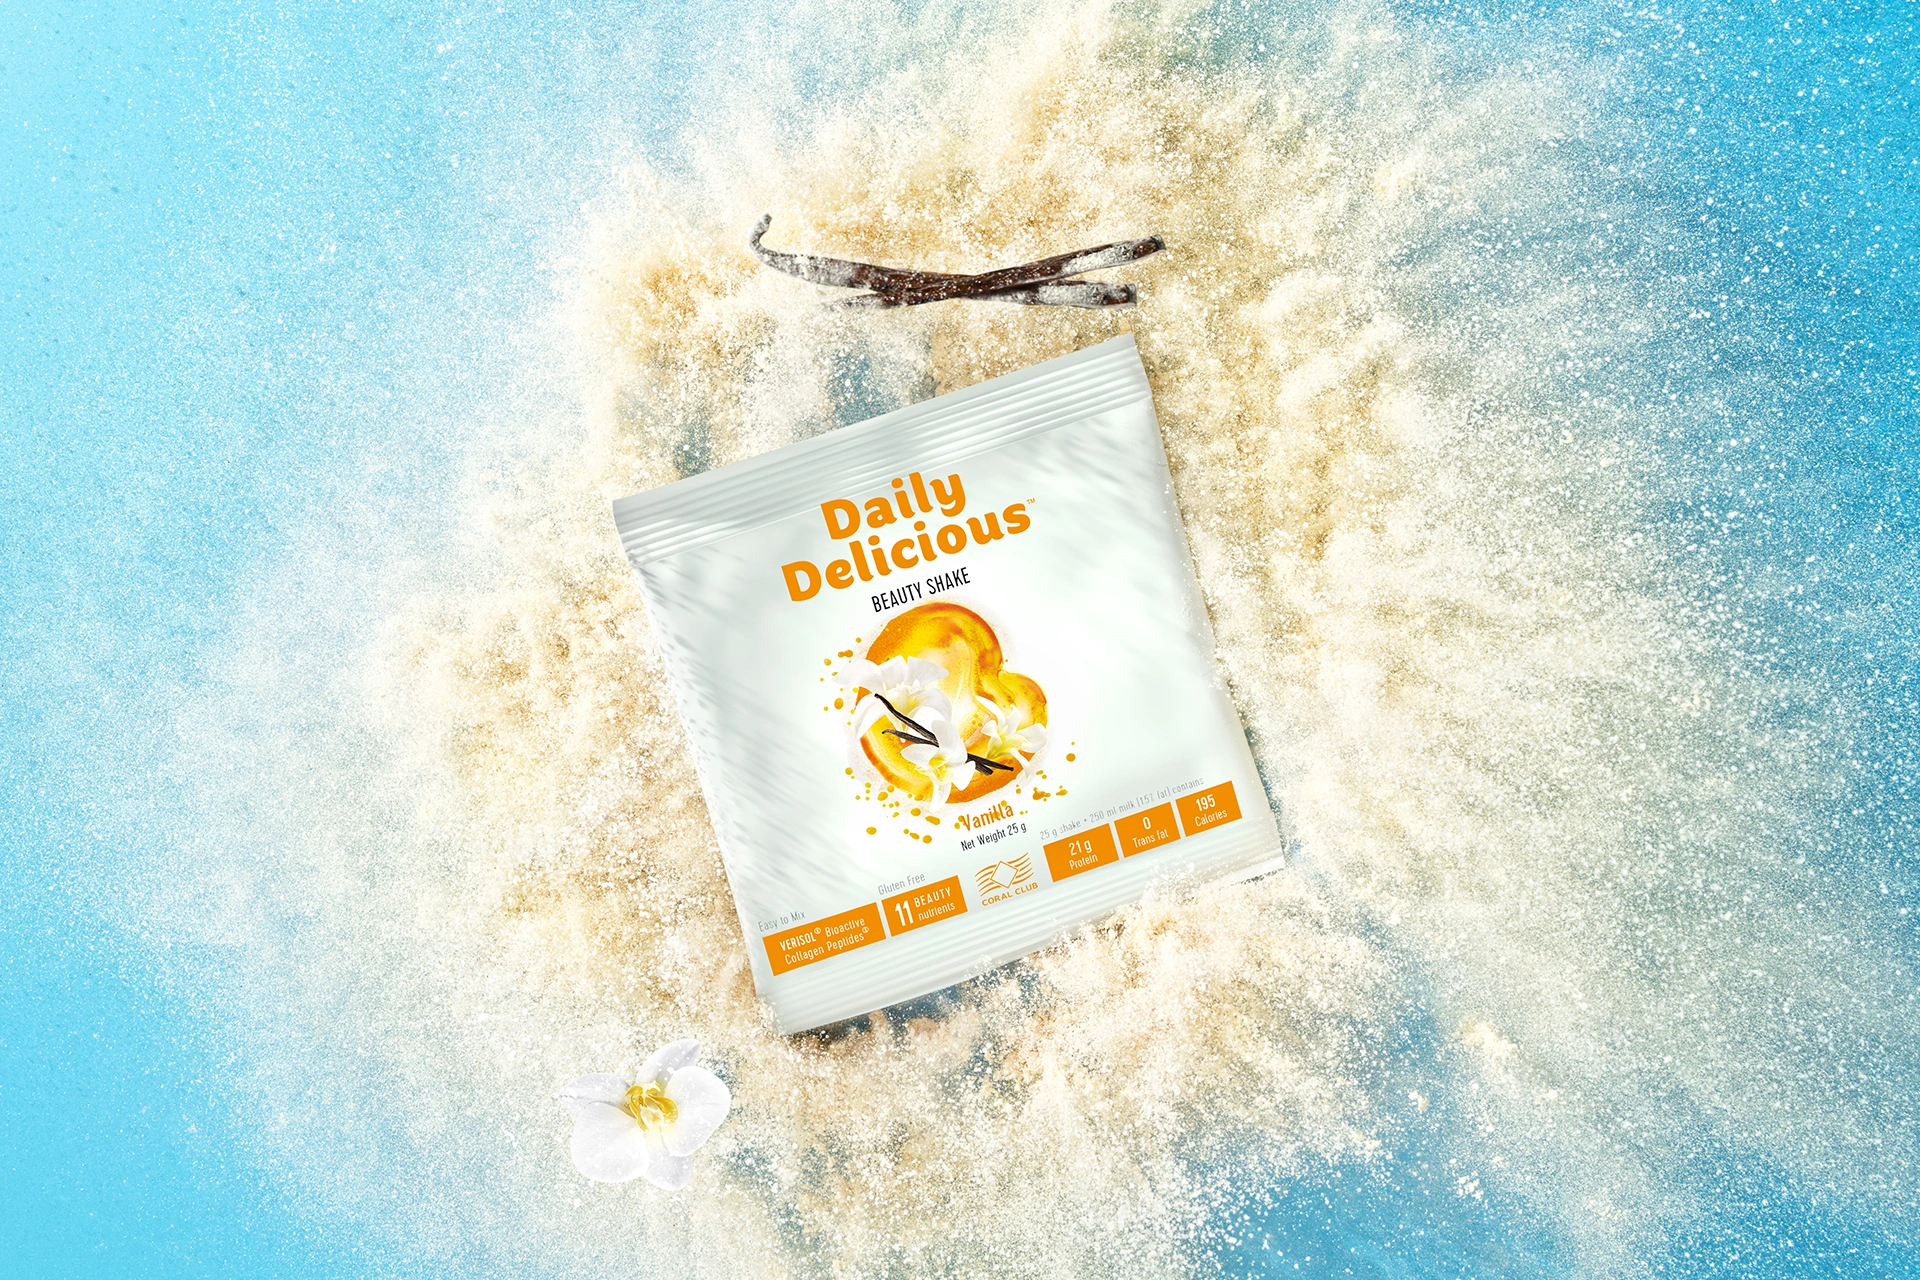 Daily Delicious Beauty Shake Vanille 